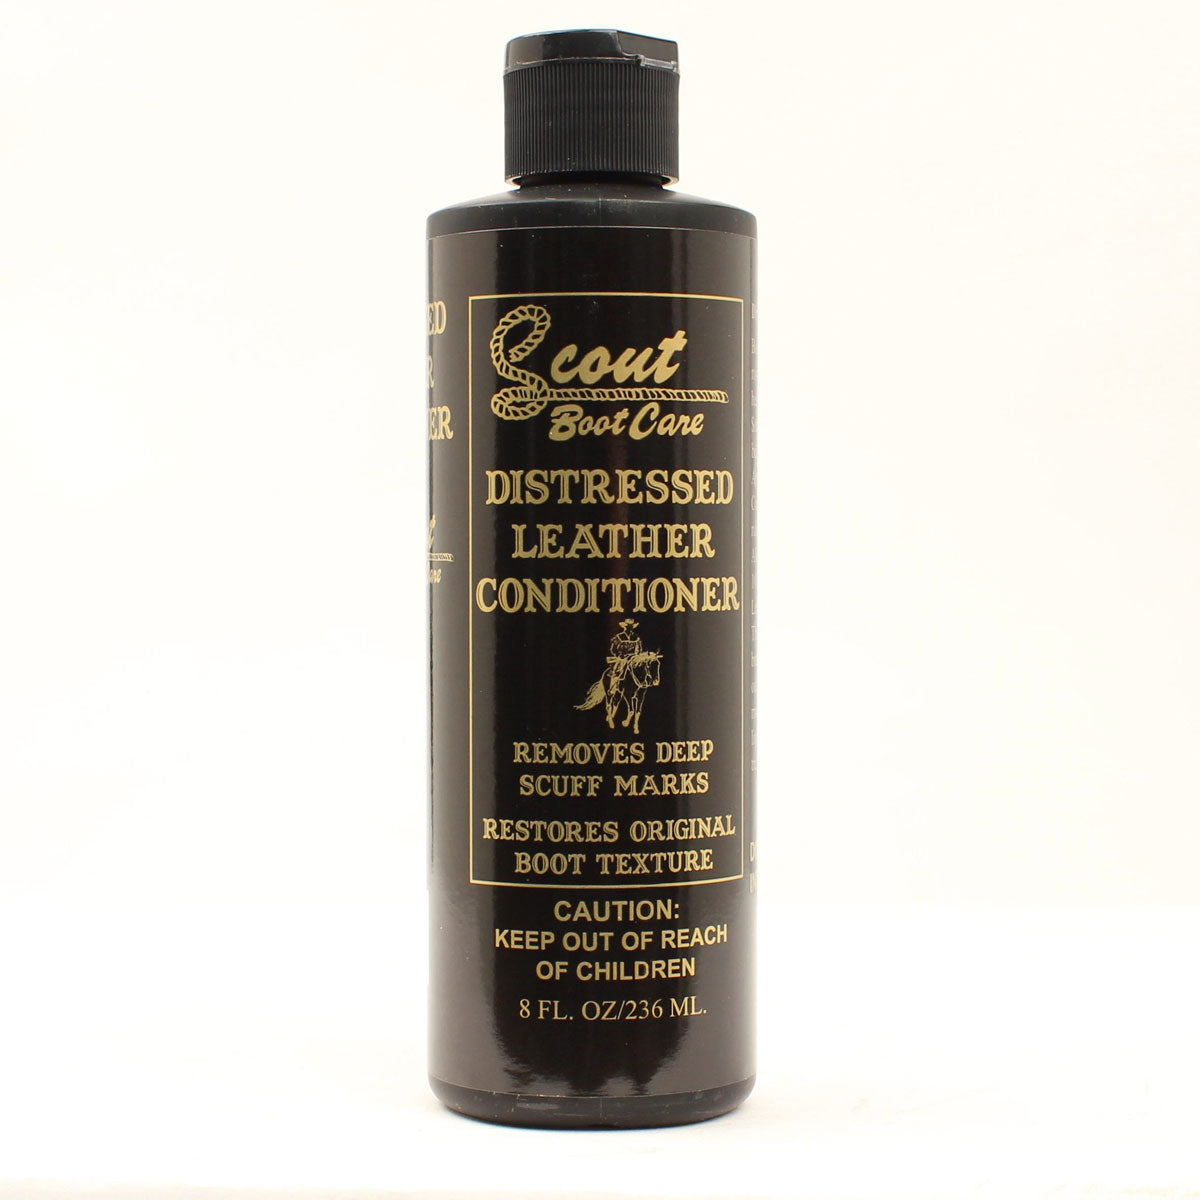 Scout Boot Care Distressed Leather Conditioner